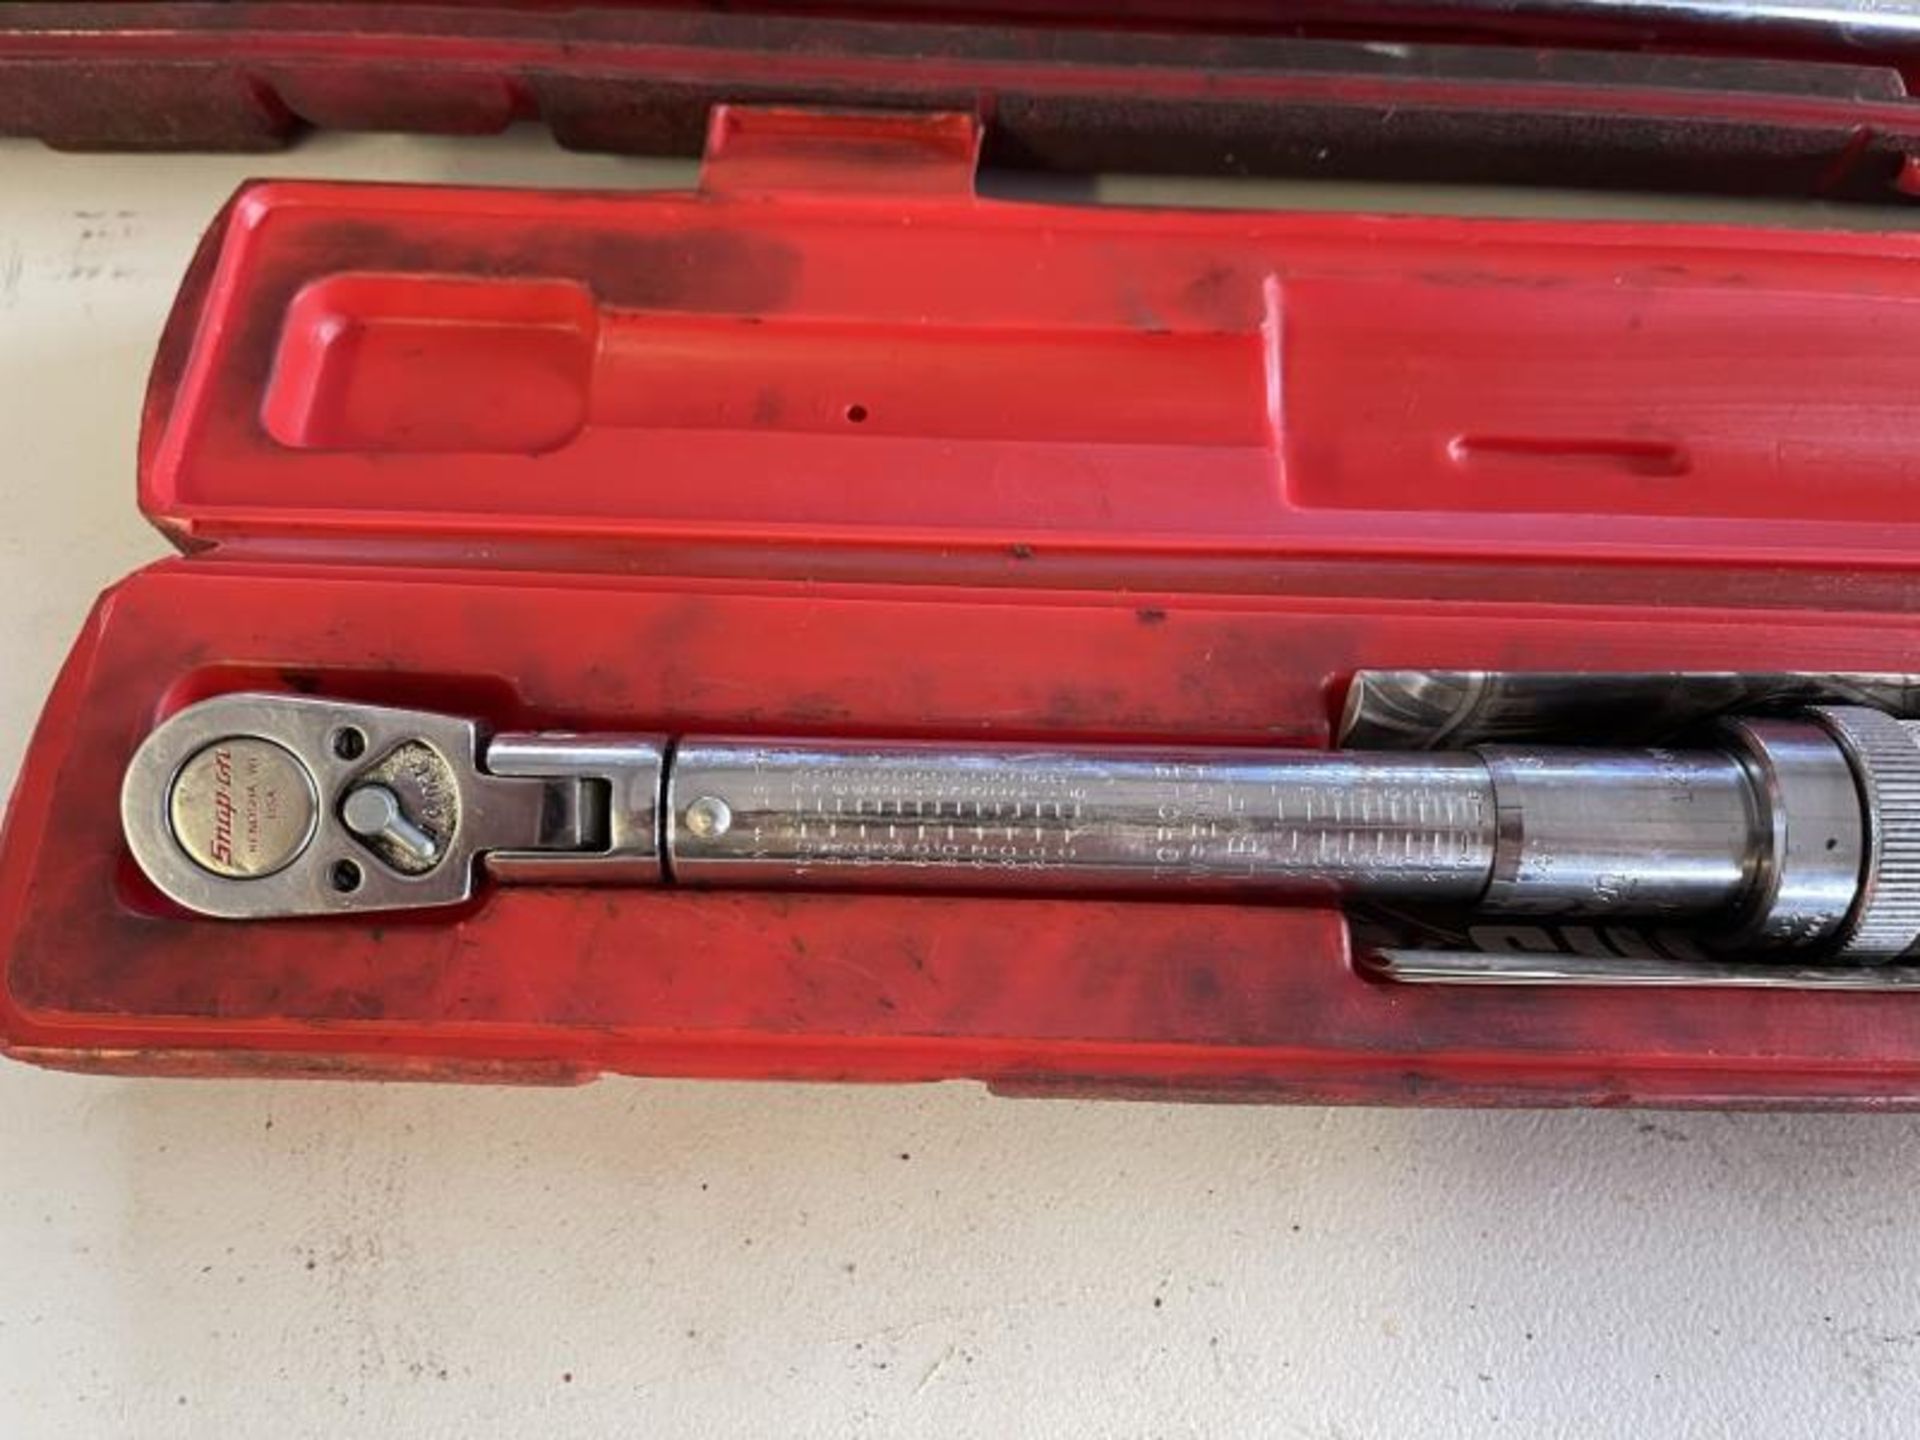 Lot of (2) Snap-On Torque Wrench; M: JFR275E & QJR-3200B - Image 2 of 4